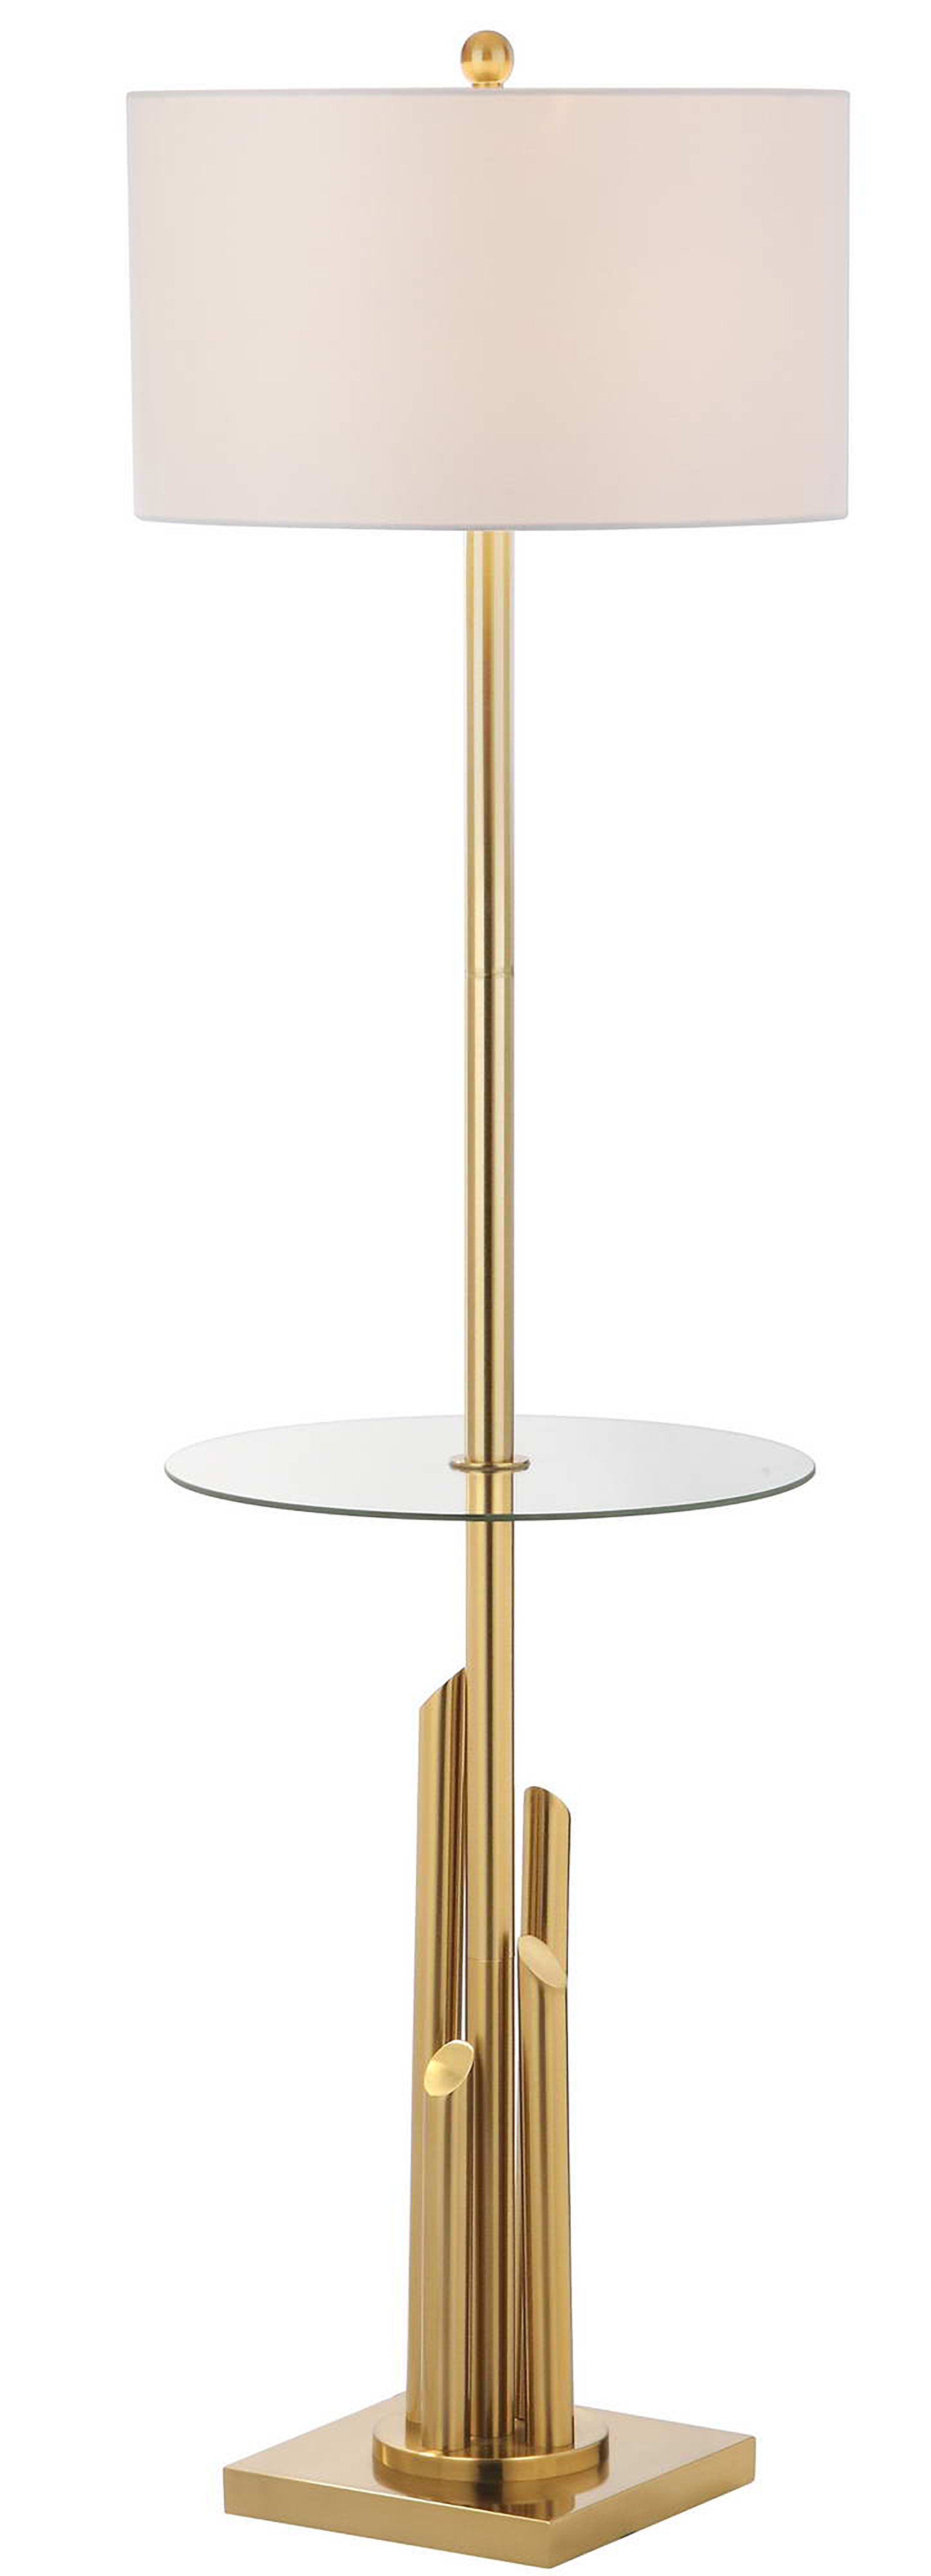 Ambrosio Floor Lamp Side Table - Gold/White - Arlo Home - Image 0